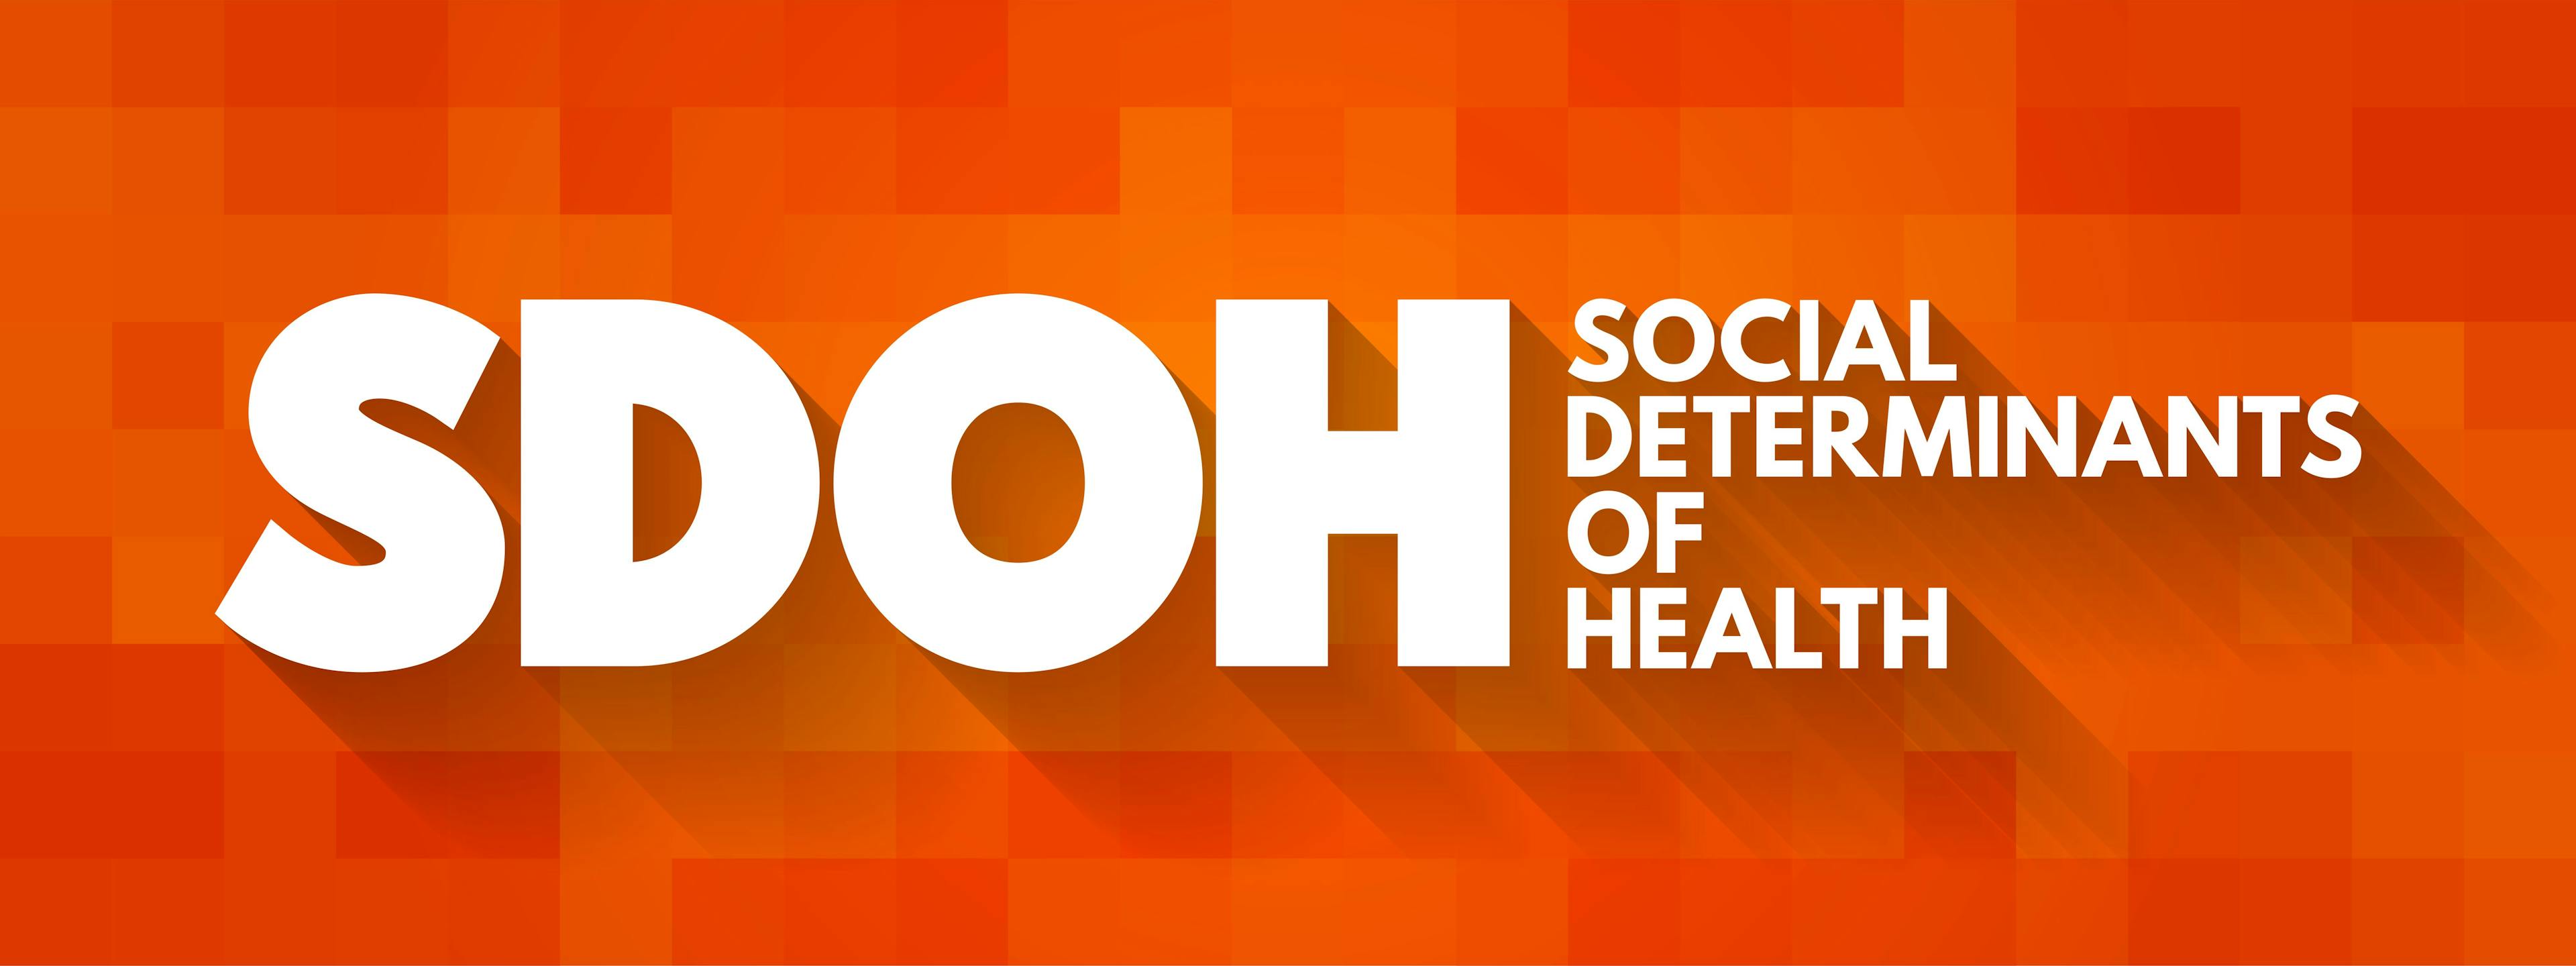 Social Determinants of Health and COVID-19 Mortality